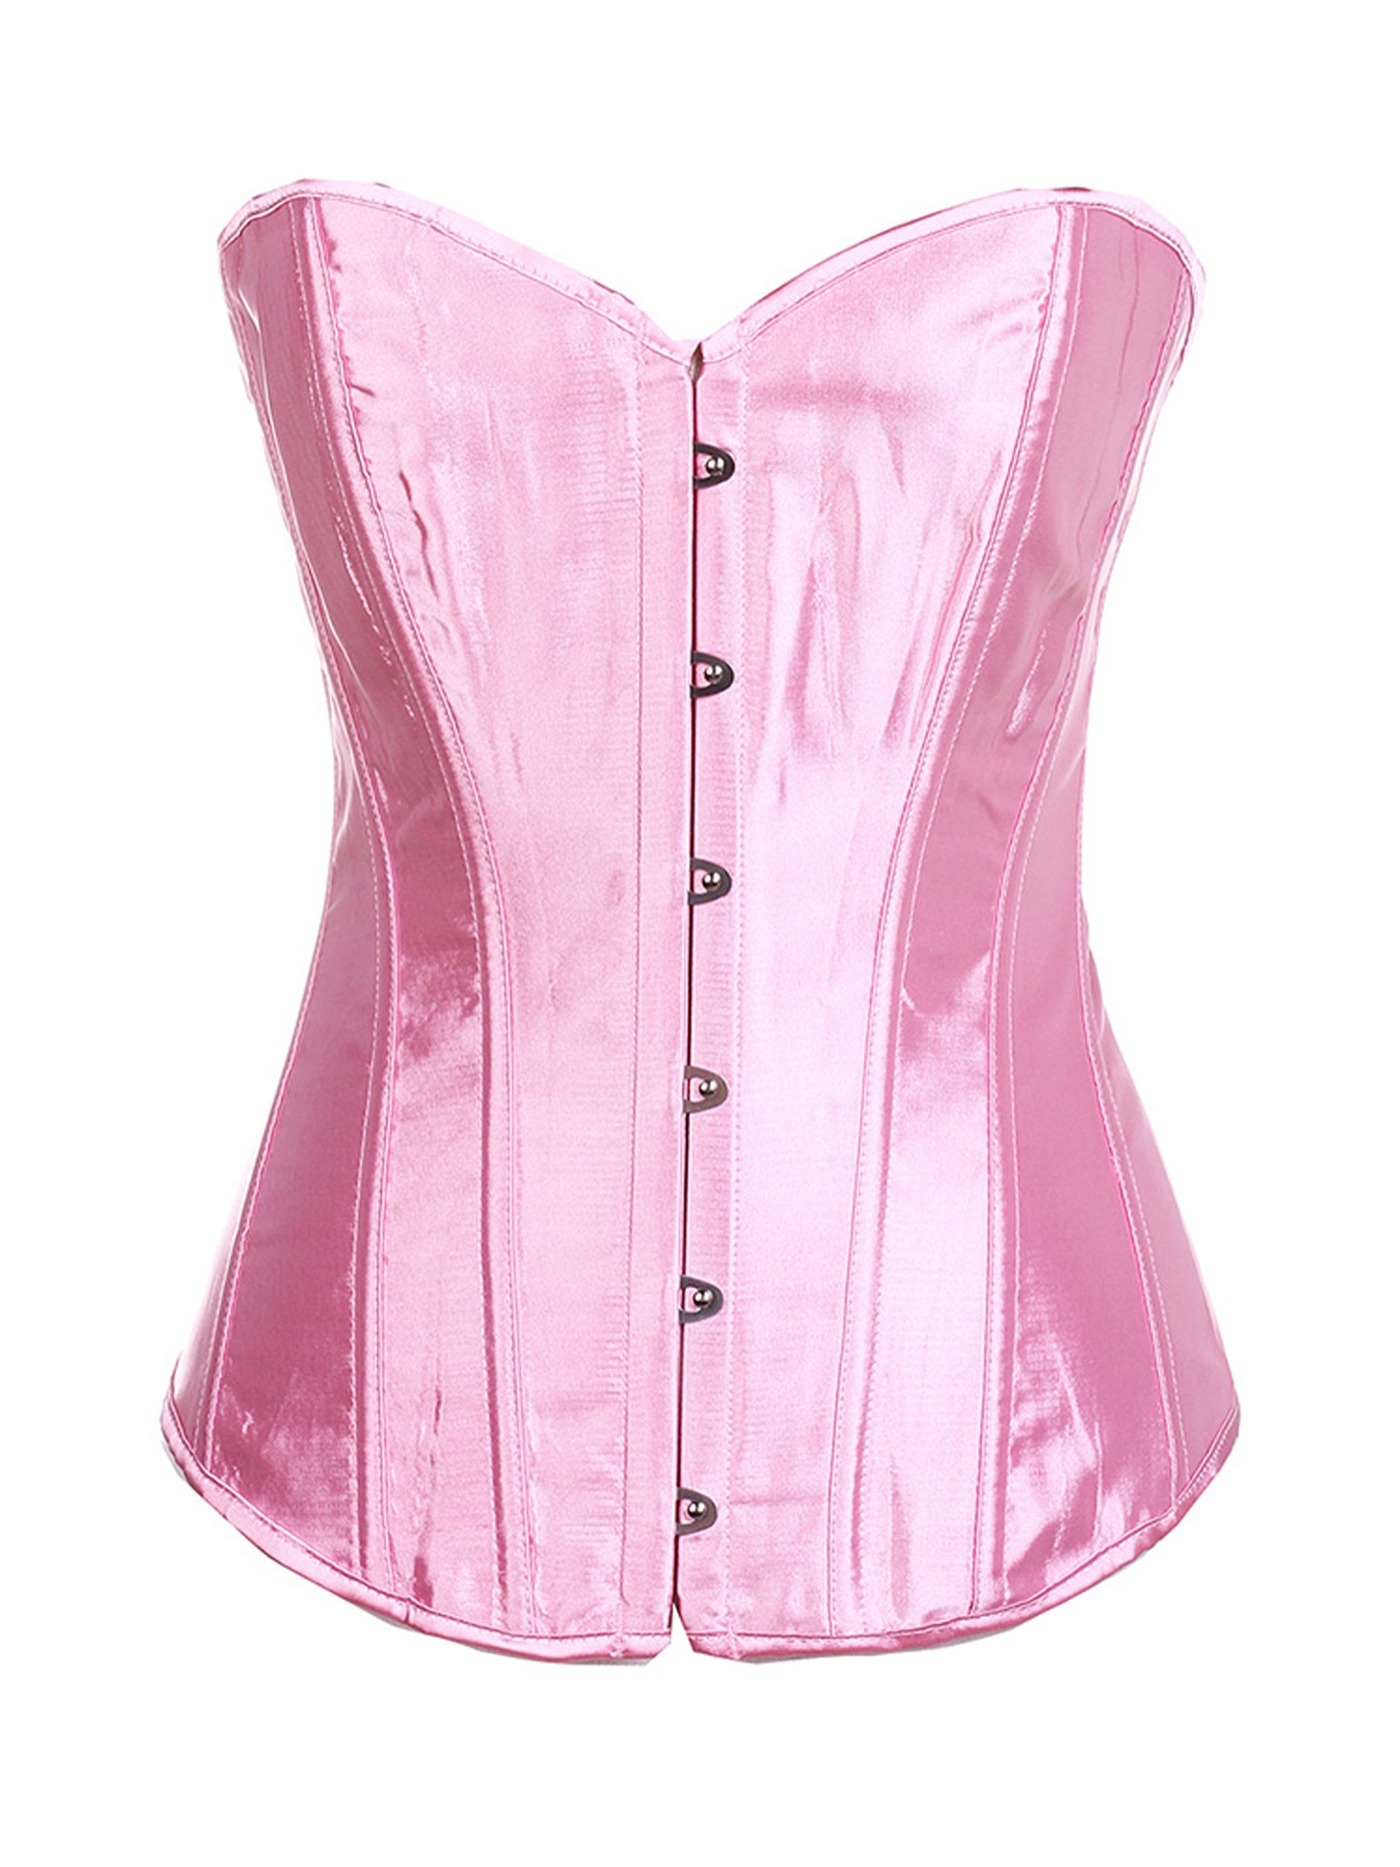  Pink Corset top Sexy Corset Lingerie for Women's Bustier and  Corset Cincher (Hot pink, Large/X-Large): Clothing, Shoes & Jewelry